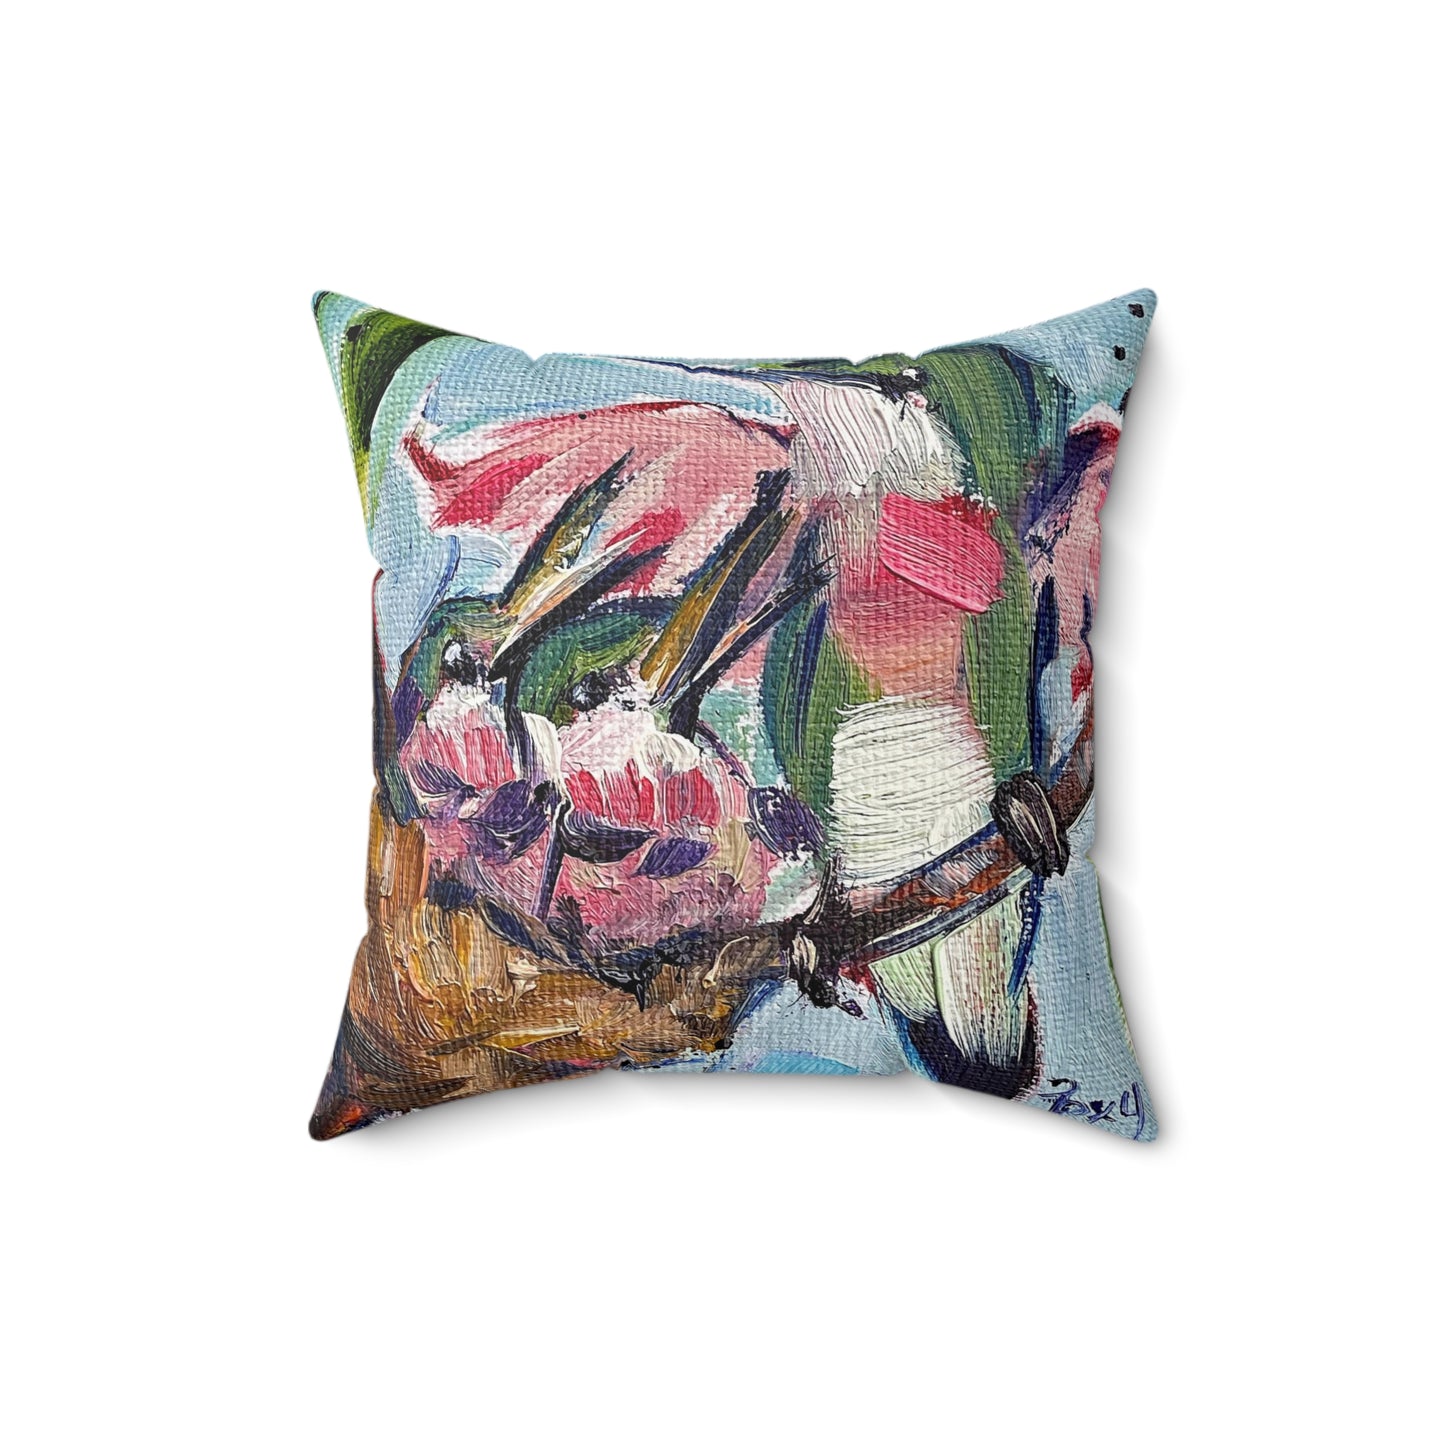 Hungry Hummers (Hummingbird at Nest with Babies) Indoor Spun Polyester Square Pillow